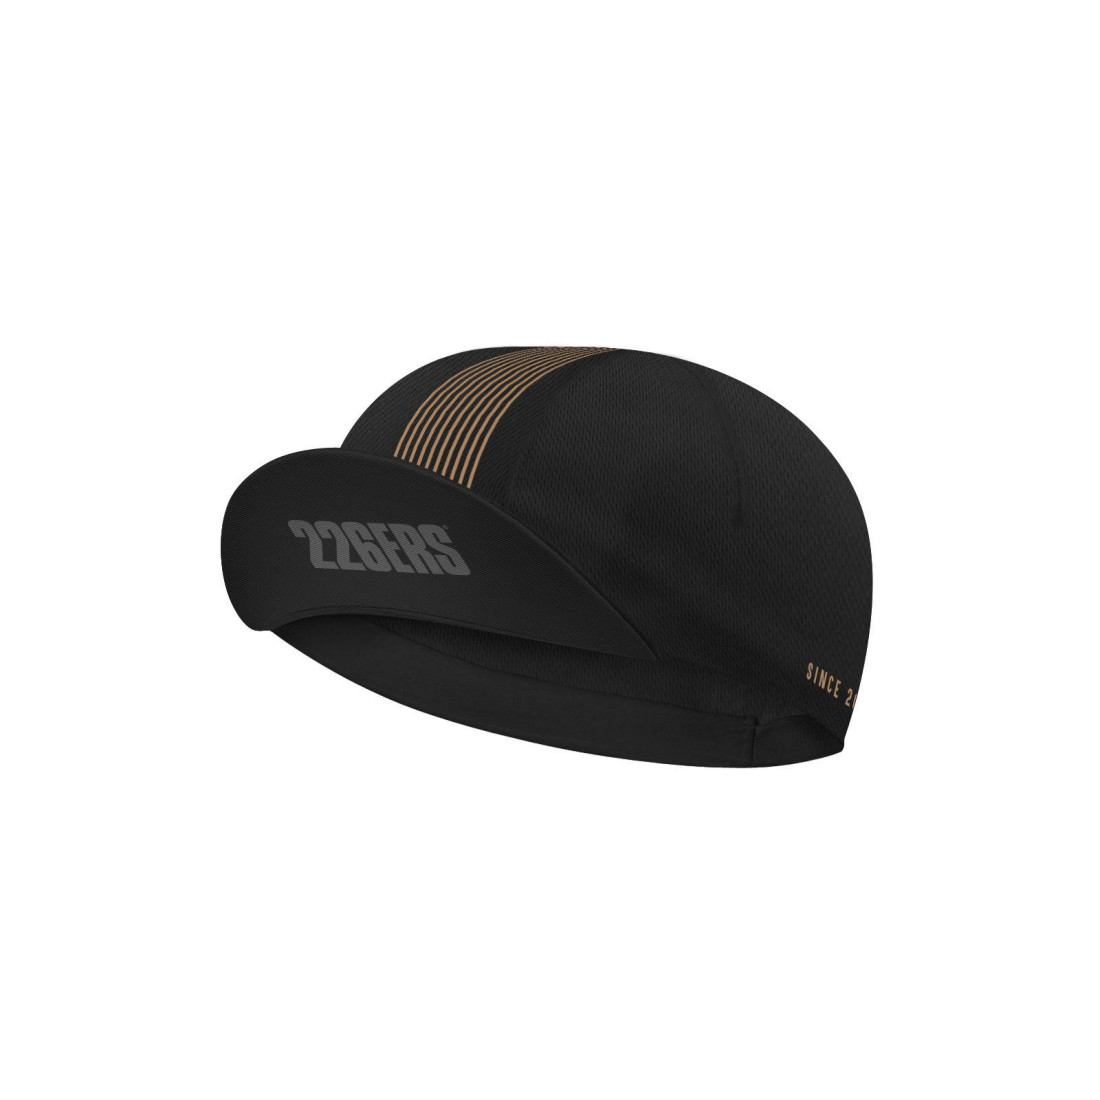 CYCLING HAT SINCE 2010 LTD - OUTLET 50%